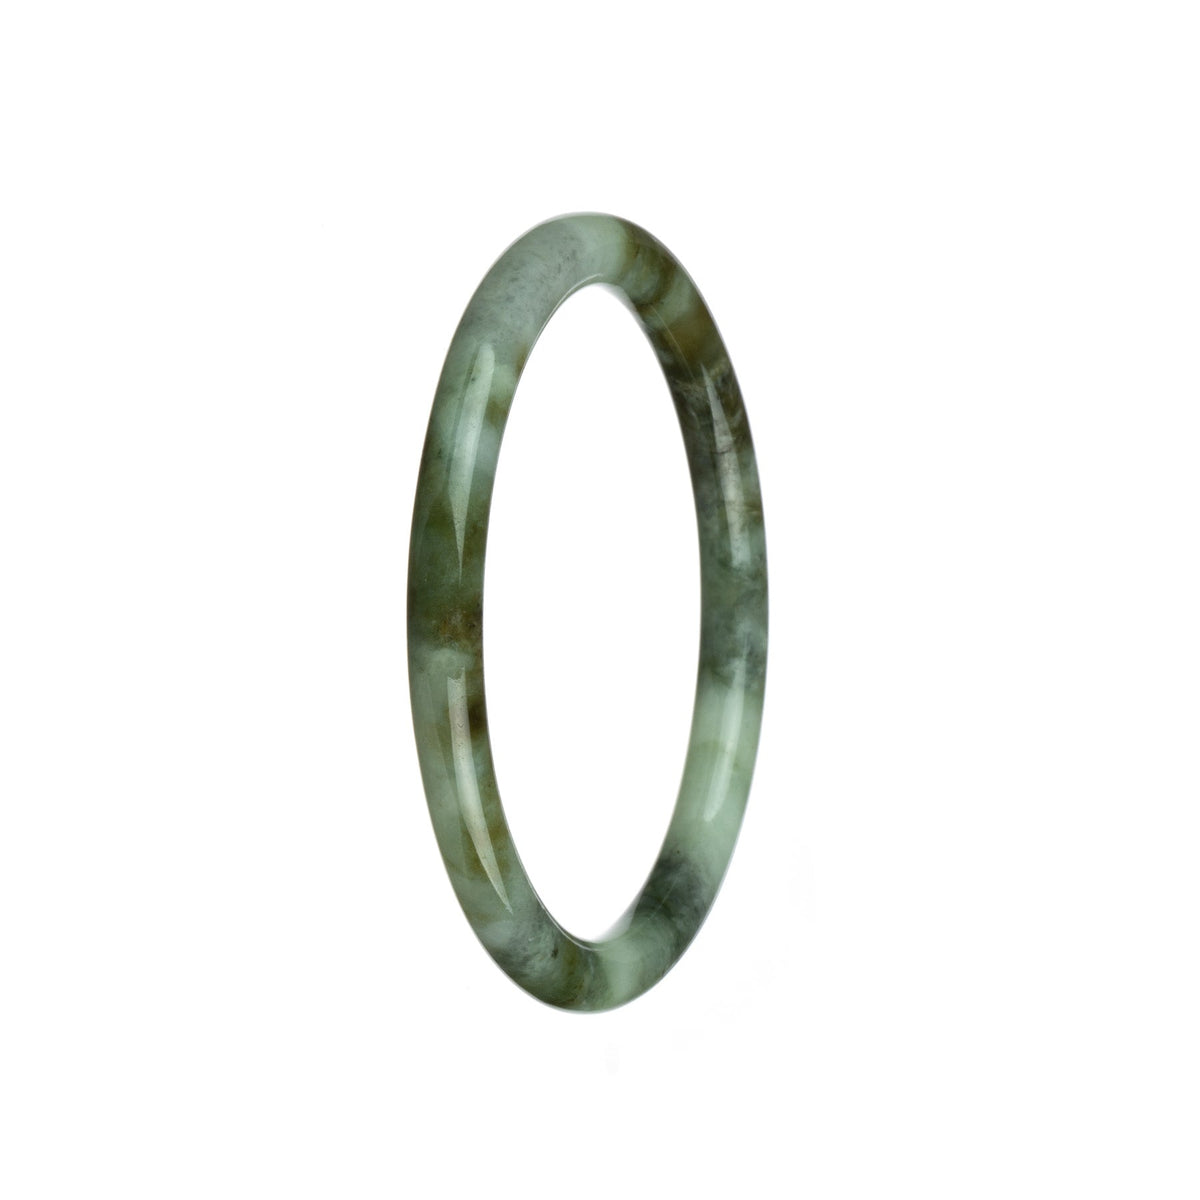 A close-up photo of a small round jade bangle bracelet in pale green and brown colors. The jade has a traditional pattern.